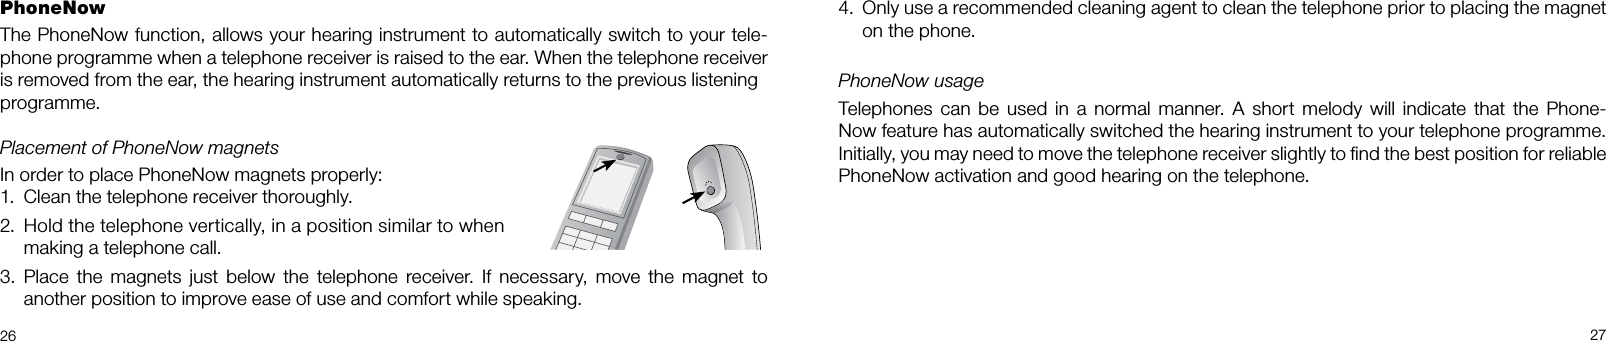 26 27PhoneNowThe PhoneNow function, allows your hearing instrument to automatically switch to your tele-phone programme when a telephone receiver is raised to the ear. When the telephone receiver is removed from the ear, the hearing instrument automatically returns to the previous listeningprogramme.Placement of PhoneNow magnetsIn order to place PhoneNow magnets properly:1.  Clean the telephone receiver thoroughly.2.   Hold the telephone vertically, in a position similar to when  making a telephone call.3.  Place  the  magnets  just  below the telephone  receiver.  If  necessary,  move  the  magnet  to another position to improve ease of use and comfort while speaking. 4.   Only use a recommended cleaning agent to clean the telephone prior to placing the magnet on the phone.PhoneNow usageTelephones can  be  used in  a  normal  manner. A  short  melody will indicate that  the  Phone-Now feature has automatically switched the hearing instrument to your telephone programme.  Initially, you may need to move the telephone receiver slightly to ﬁnd the best position for reliable PhoneNow activation and good hearing on the telephone.